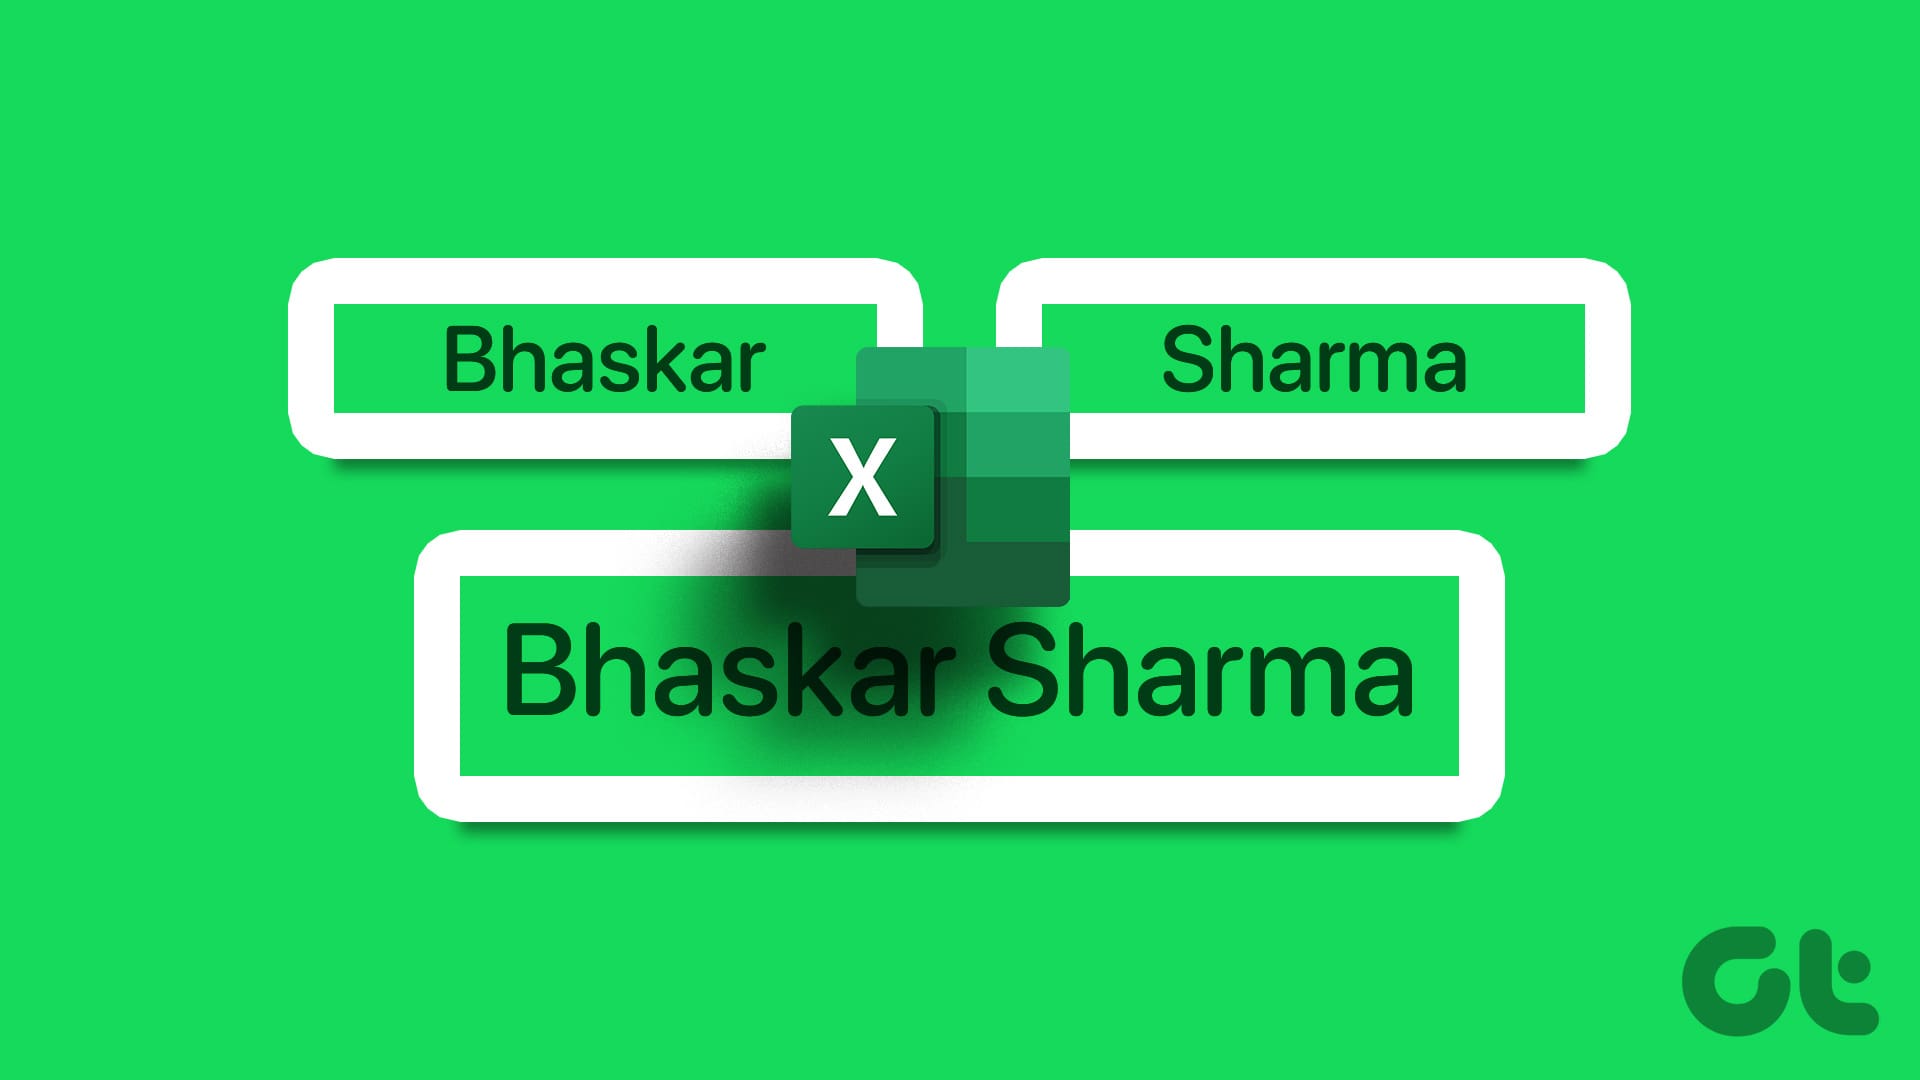 How to Combine First and Last Names in Excel